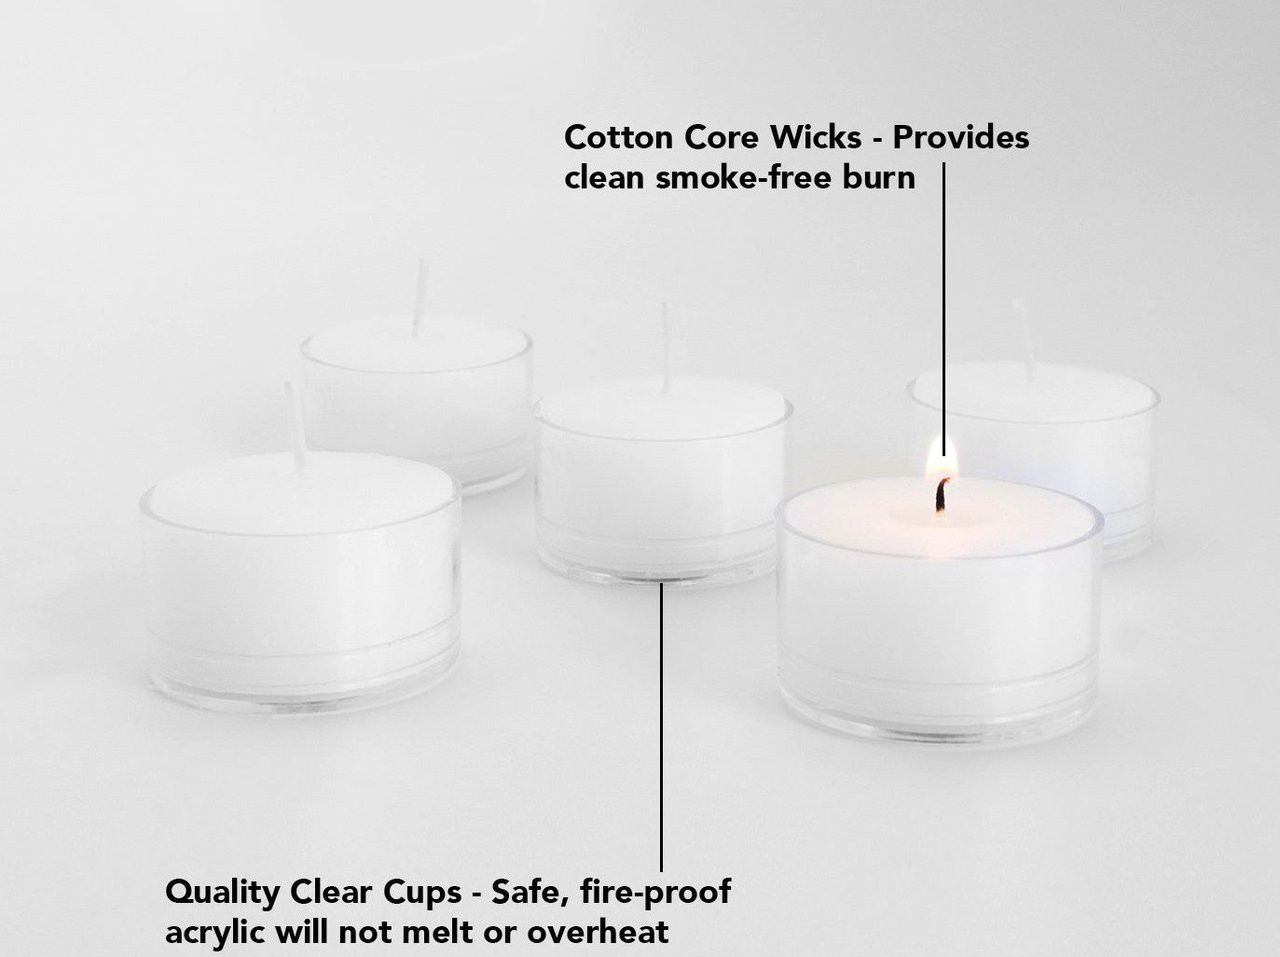 religious mini candle jars clear tea light glass candle holders